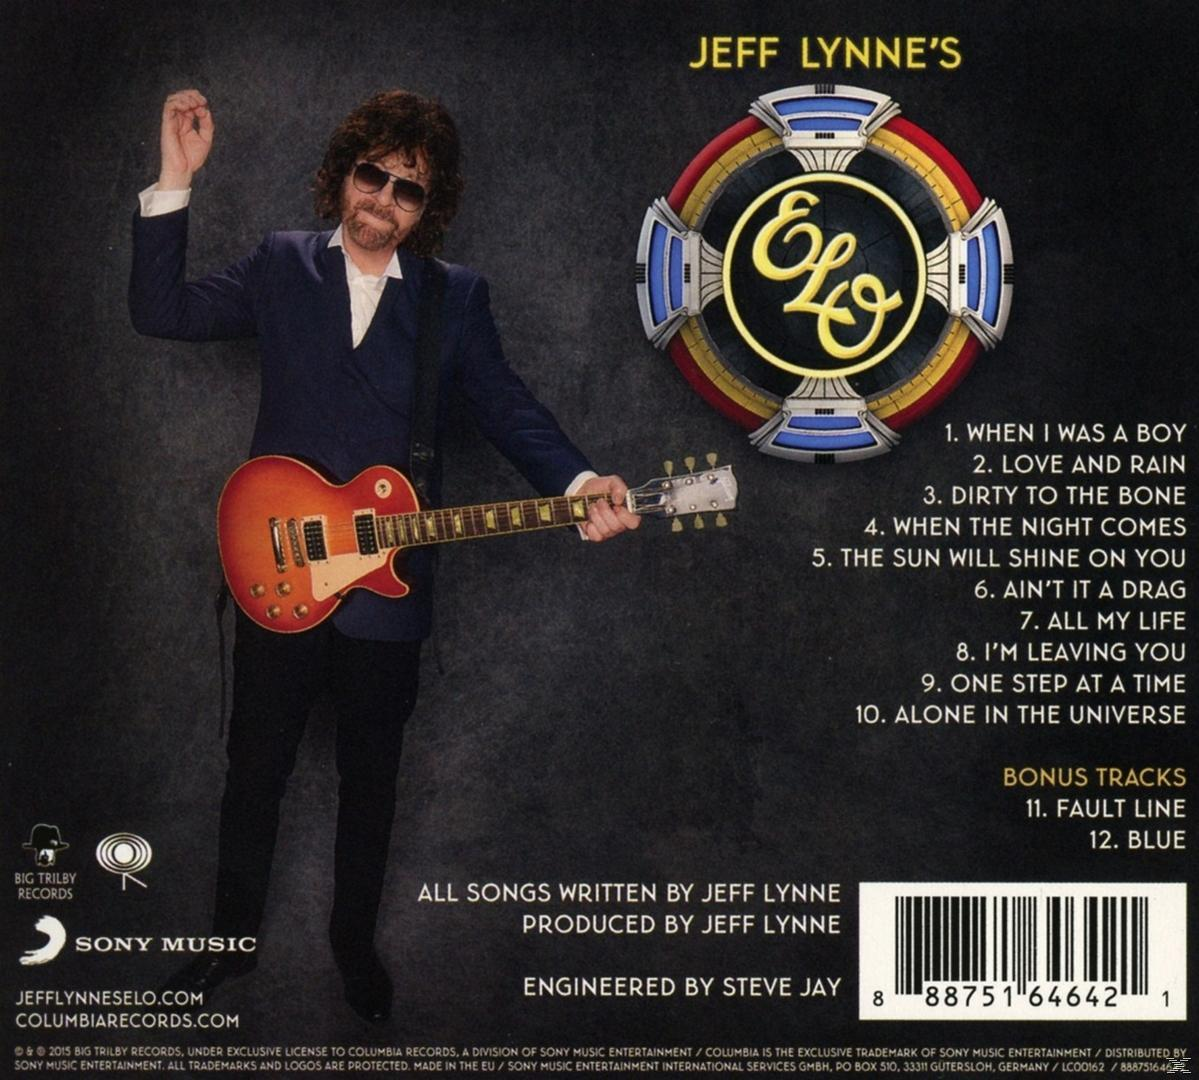 Light Orchestra in (CD) ELO-Alone Jeff Lynne\'s Jeff - Universe Lynnes\'s - Electric the